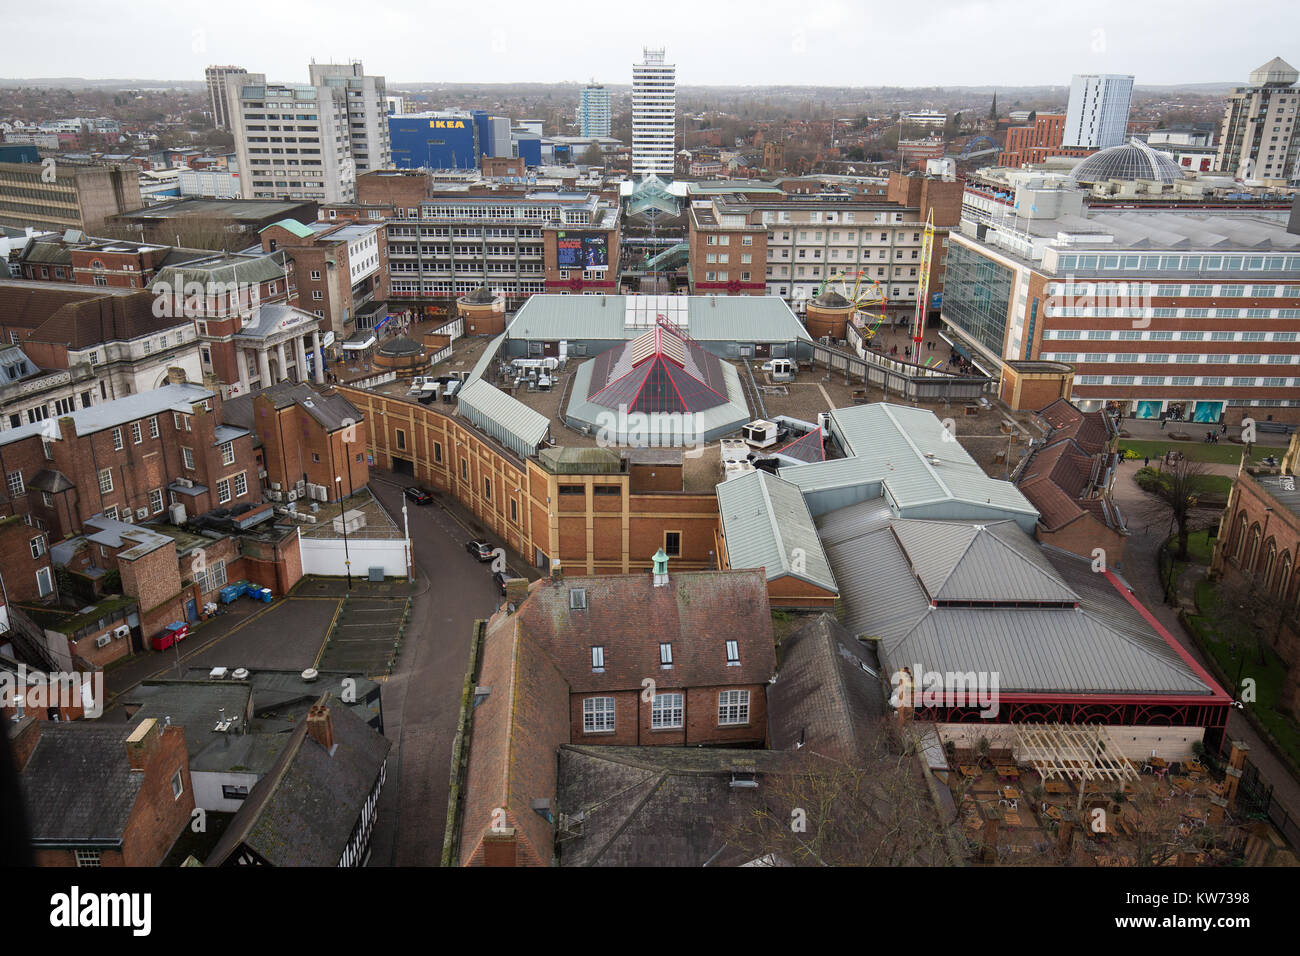 The view from atop Coventry Cathedral, West Midlands. Coventry has been announced as the UK City of Culture for 2021, historically part of Warwickshire, it is the second largest city in the West Midlands. Stock Photo